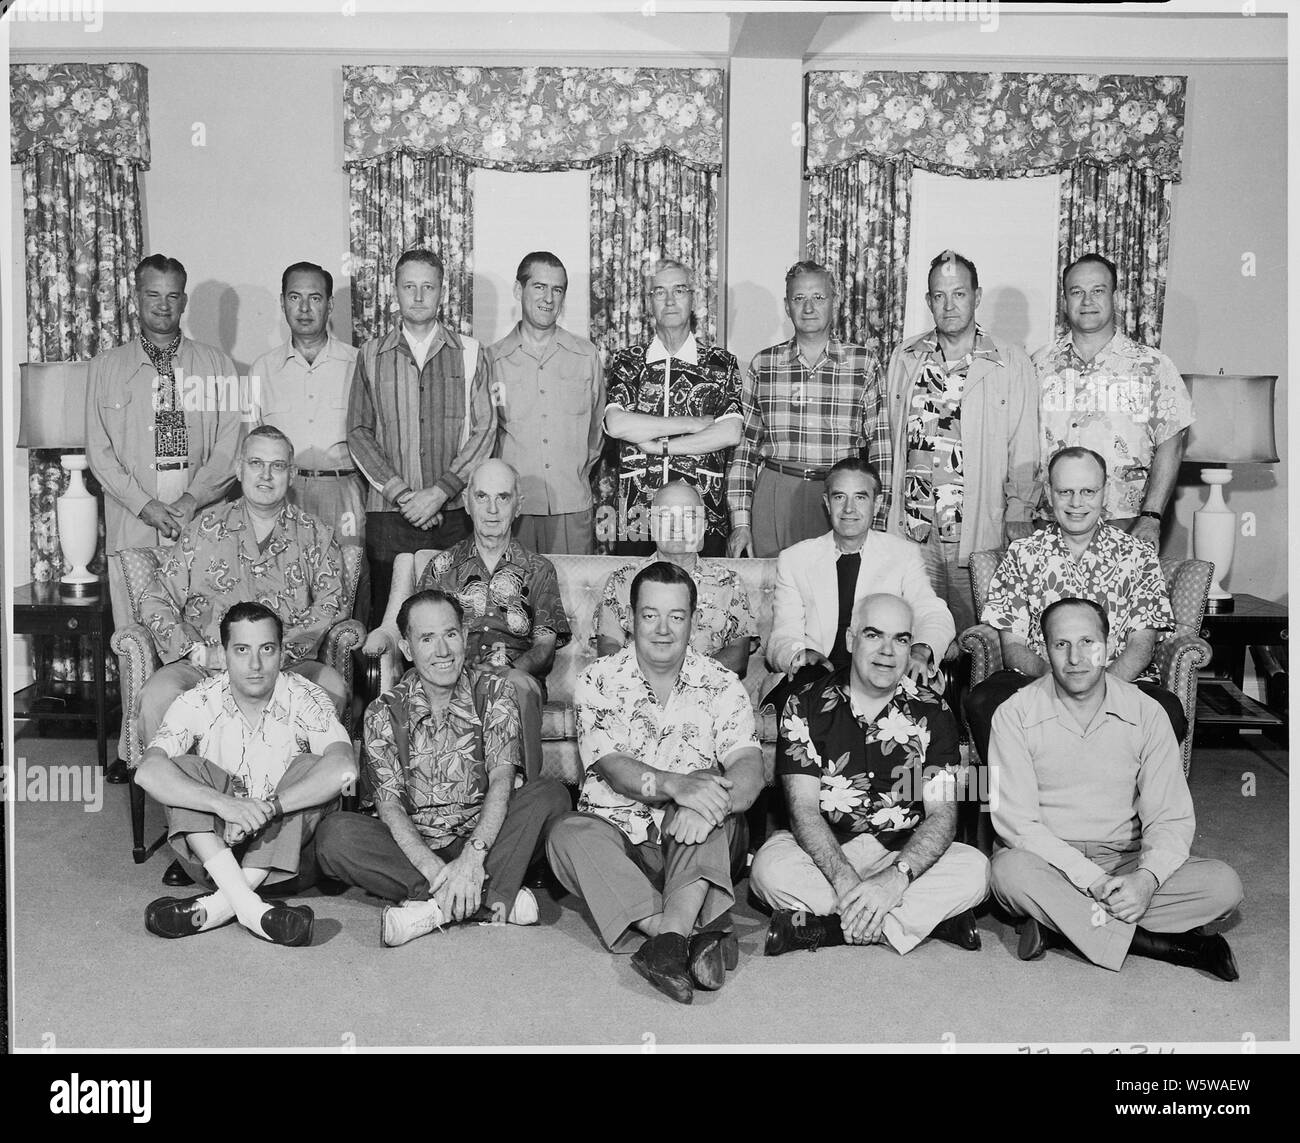 Photograph of President Truman with members of his official party (many attired in Hawaiian shirts), on vacation in Key West, Florida: (front row, left to right) Richard Neustadt, Cornelius Mara, Joseph Feeney, Philleo Nash, Irving Perlmeter; (second row, left to right) John R. Steelman, William Leahy, President Truman, W. Averell Harriman, Charles Murphy; (third row, left to right) Robert Landry, Robert Dennison, Stanley Woodward, Matthew Connelly, William Hassett, Joseph Short, Harry Vaughan, and Wallace Graham. Stock Photo